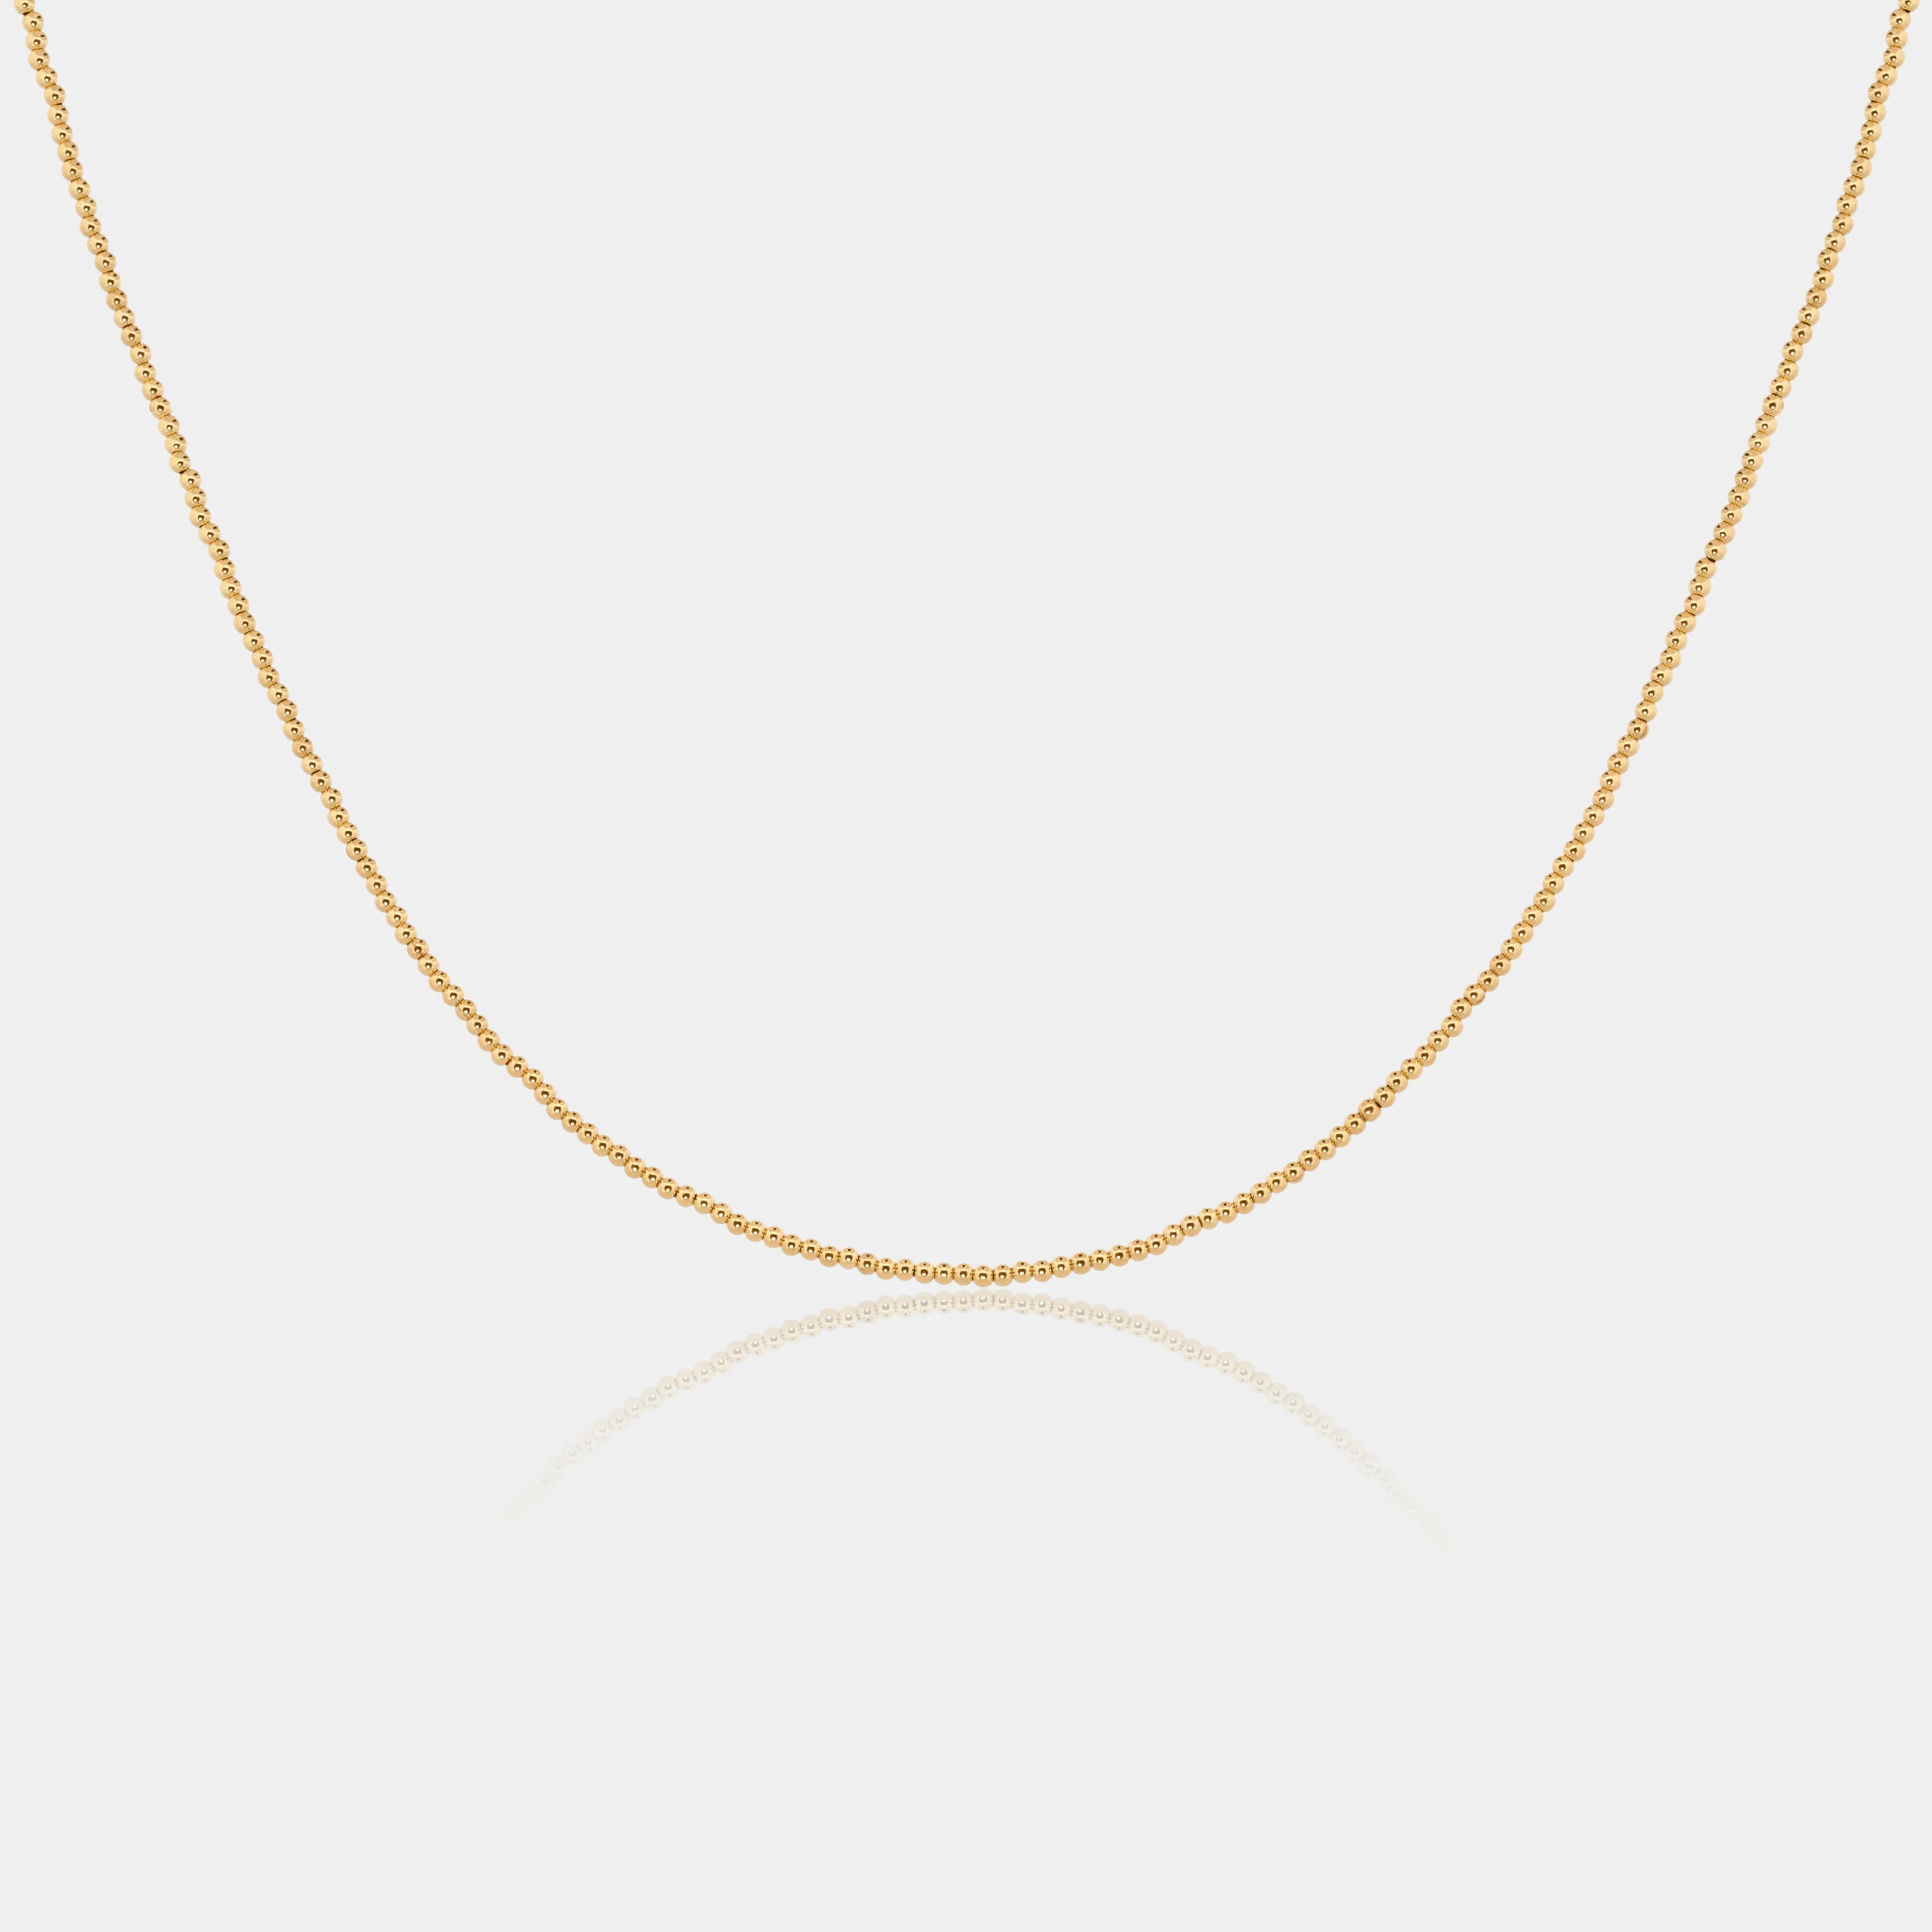 Tiny Gold Beaded Choker Necklace | LINK'D THE LABEL